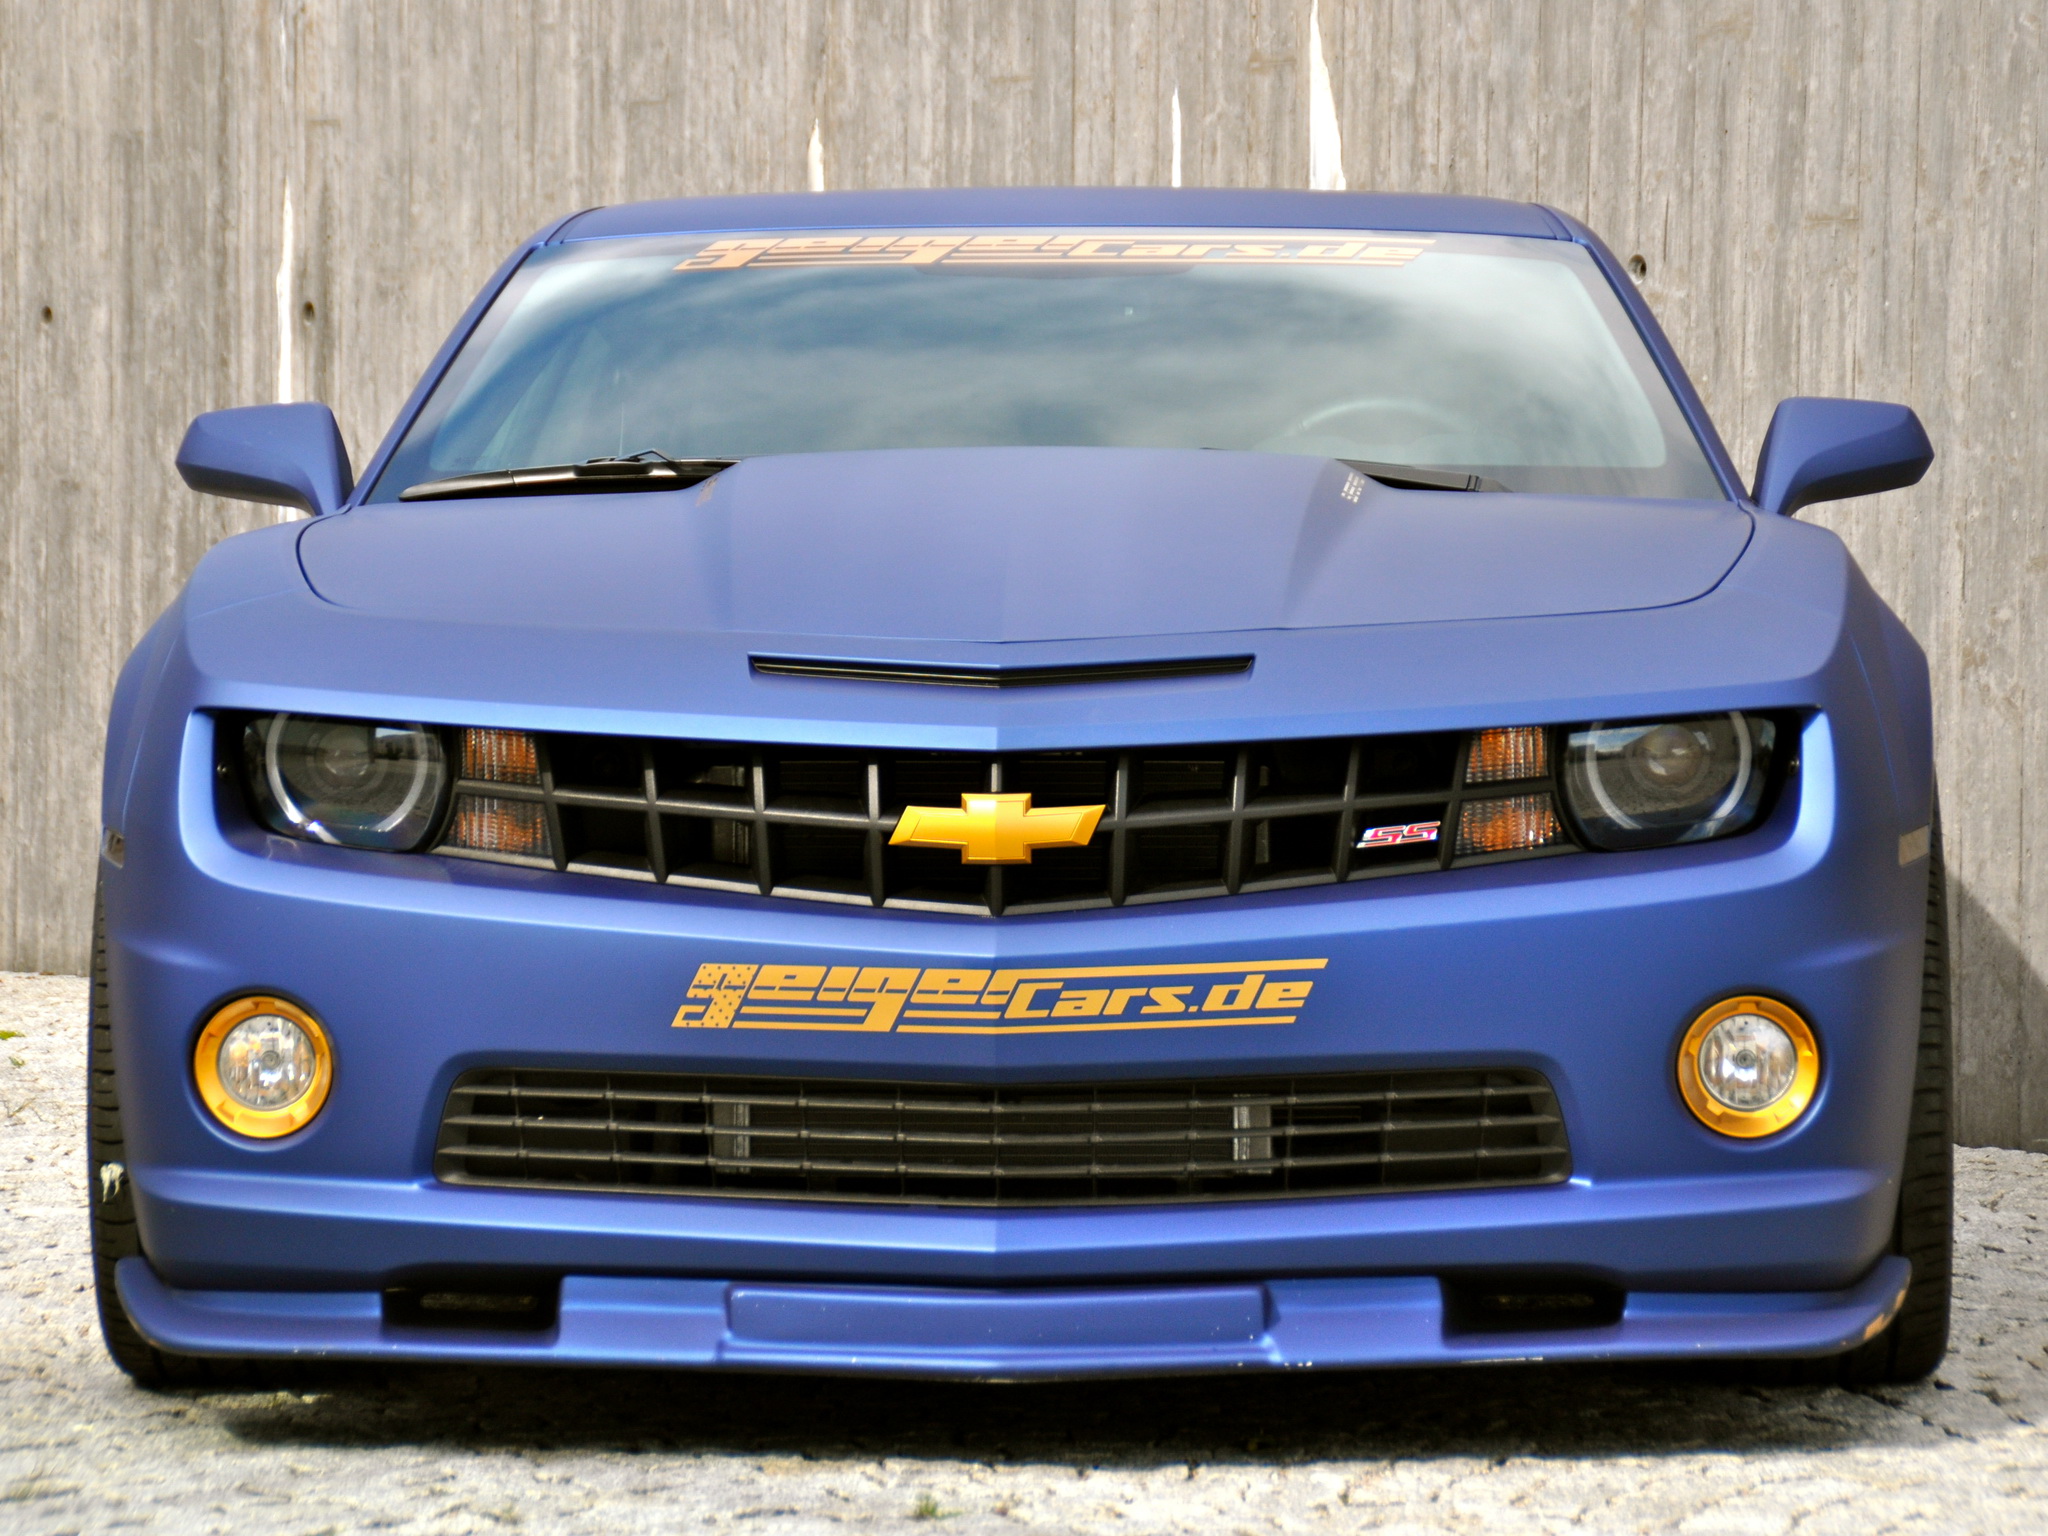 2011, Geiger, Chevrolet, Camaro, Ss, Muscle, Tuning, S s Wallpaper